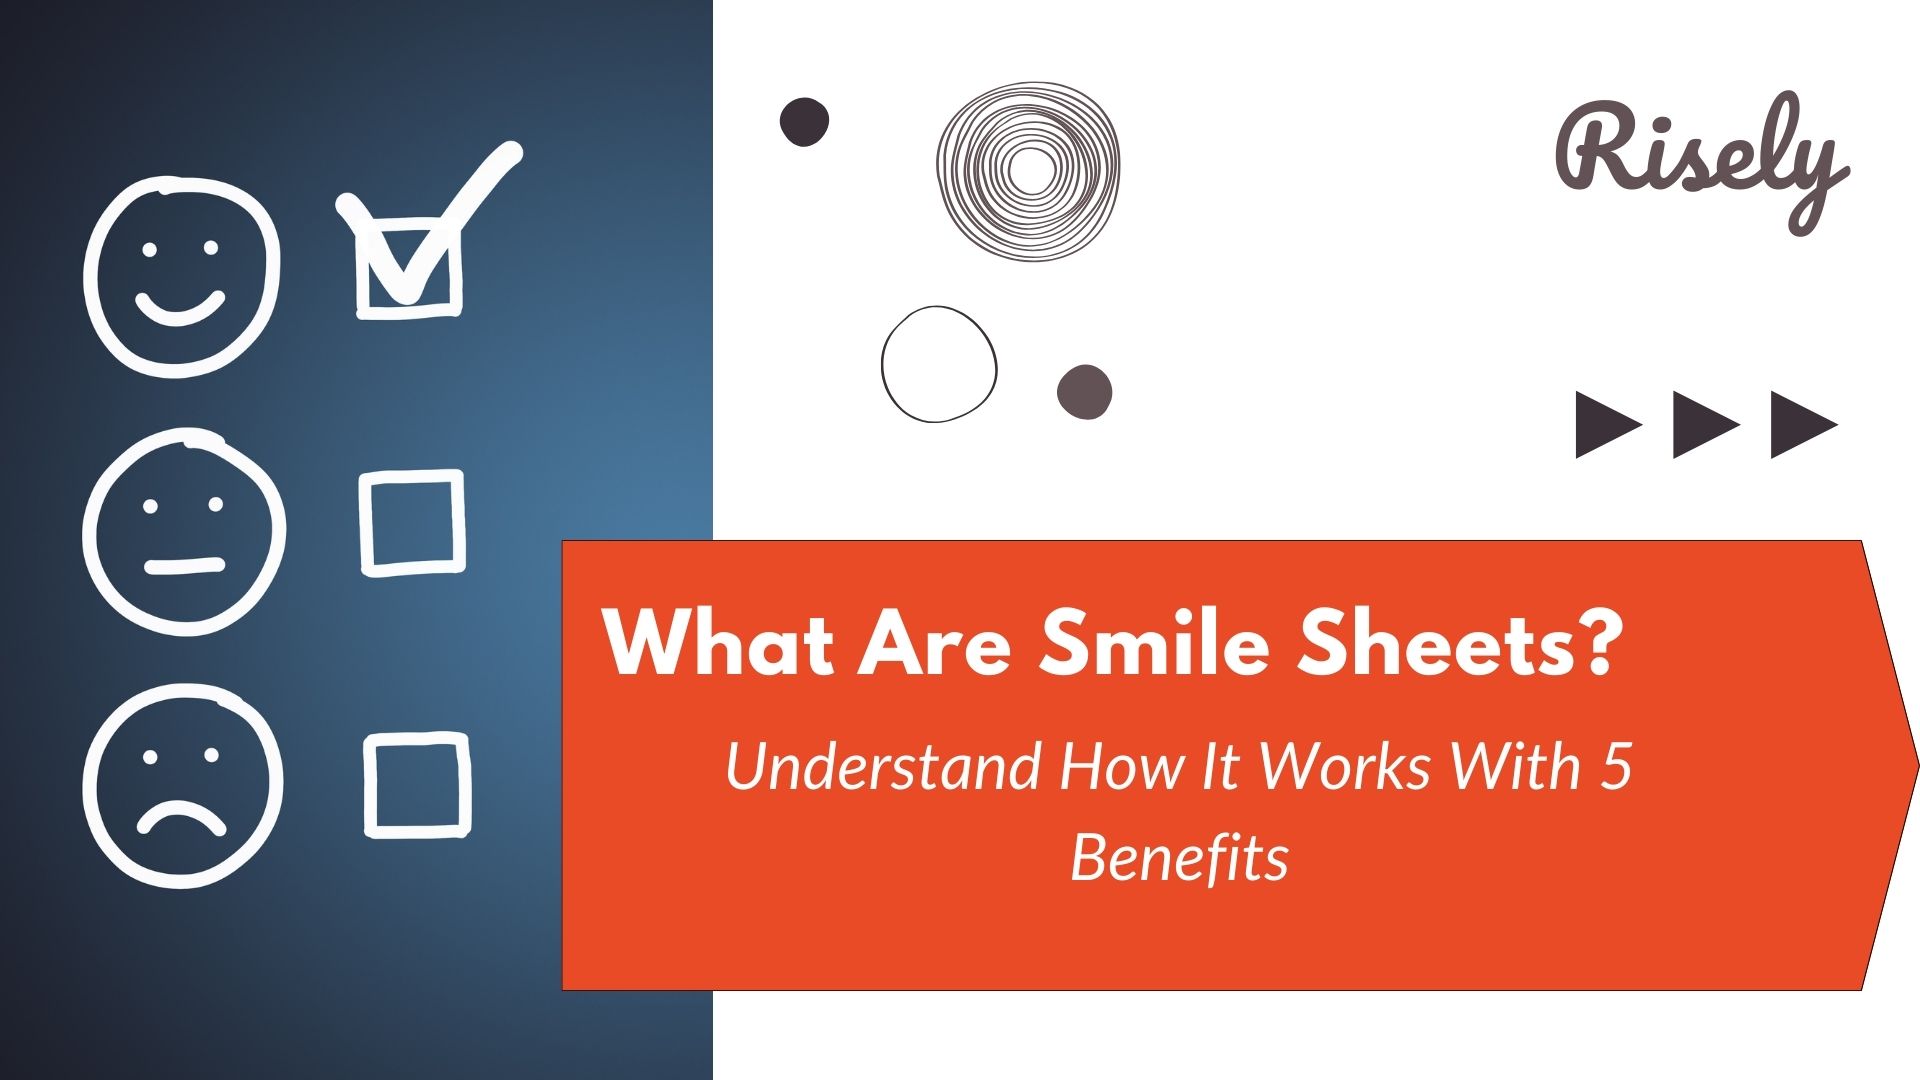 What Are Smile Sheets? Understand How It Works With 5 Benefits